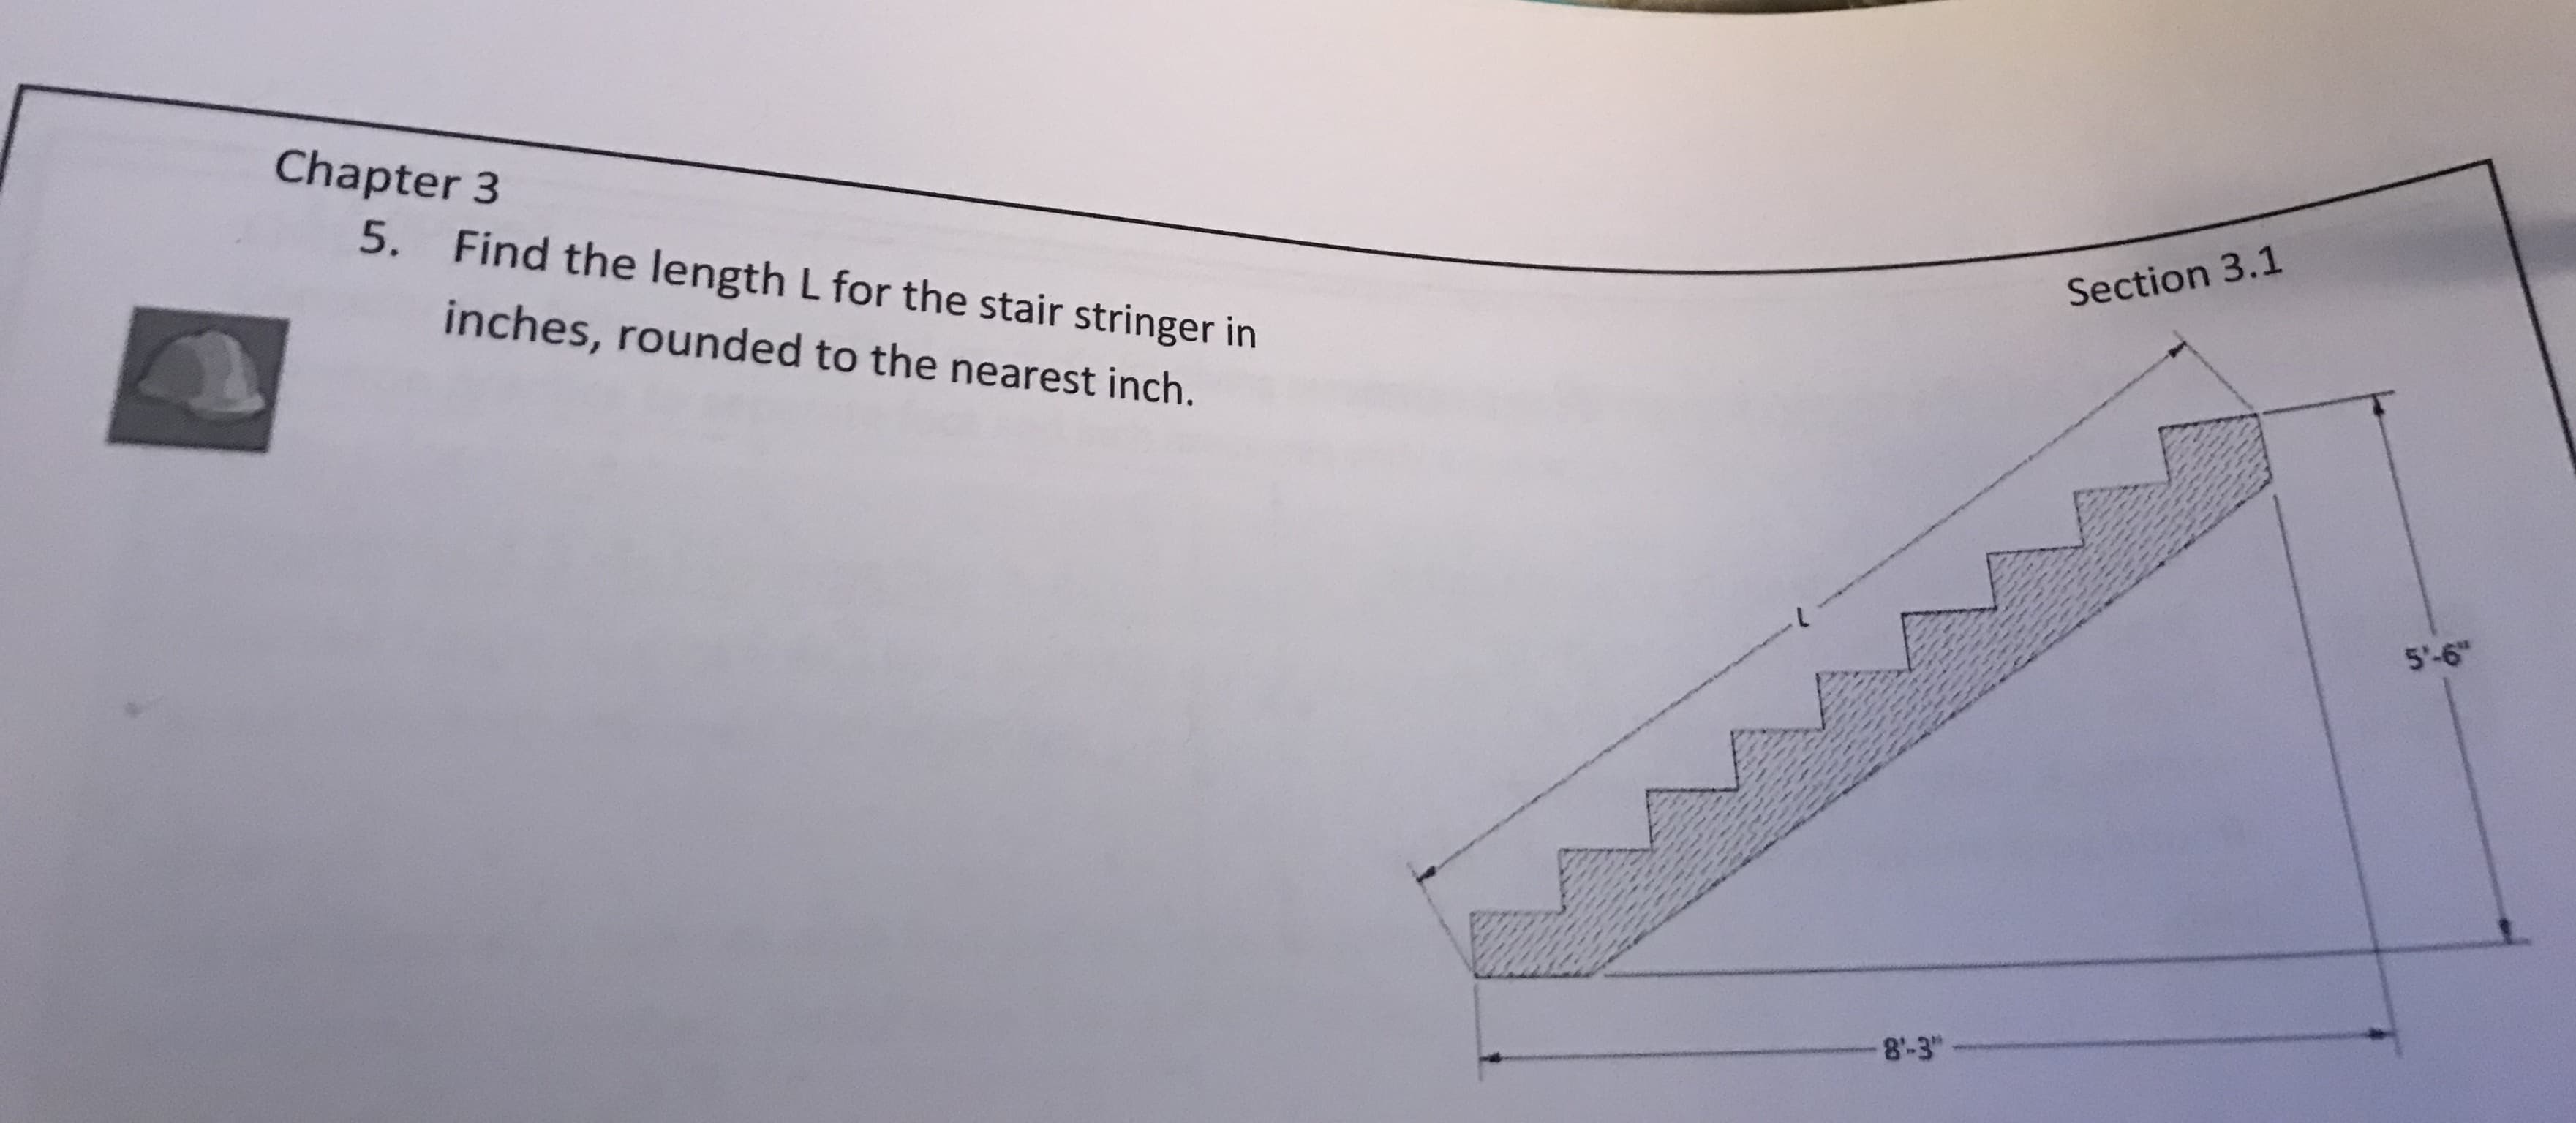 Chapter 3
Find the length Lfor the stair stringer in
inches, rounded to the nearest inch.
Section 3.1
5'-6
8-3
